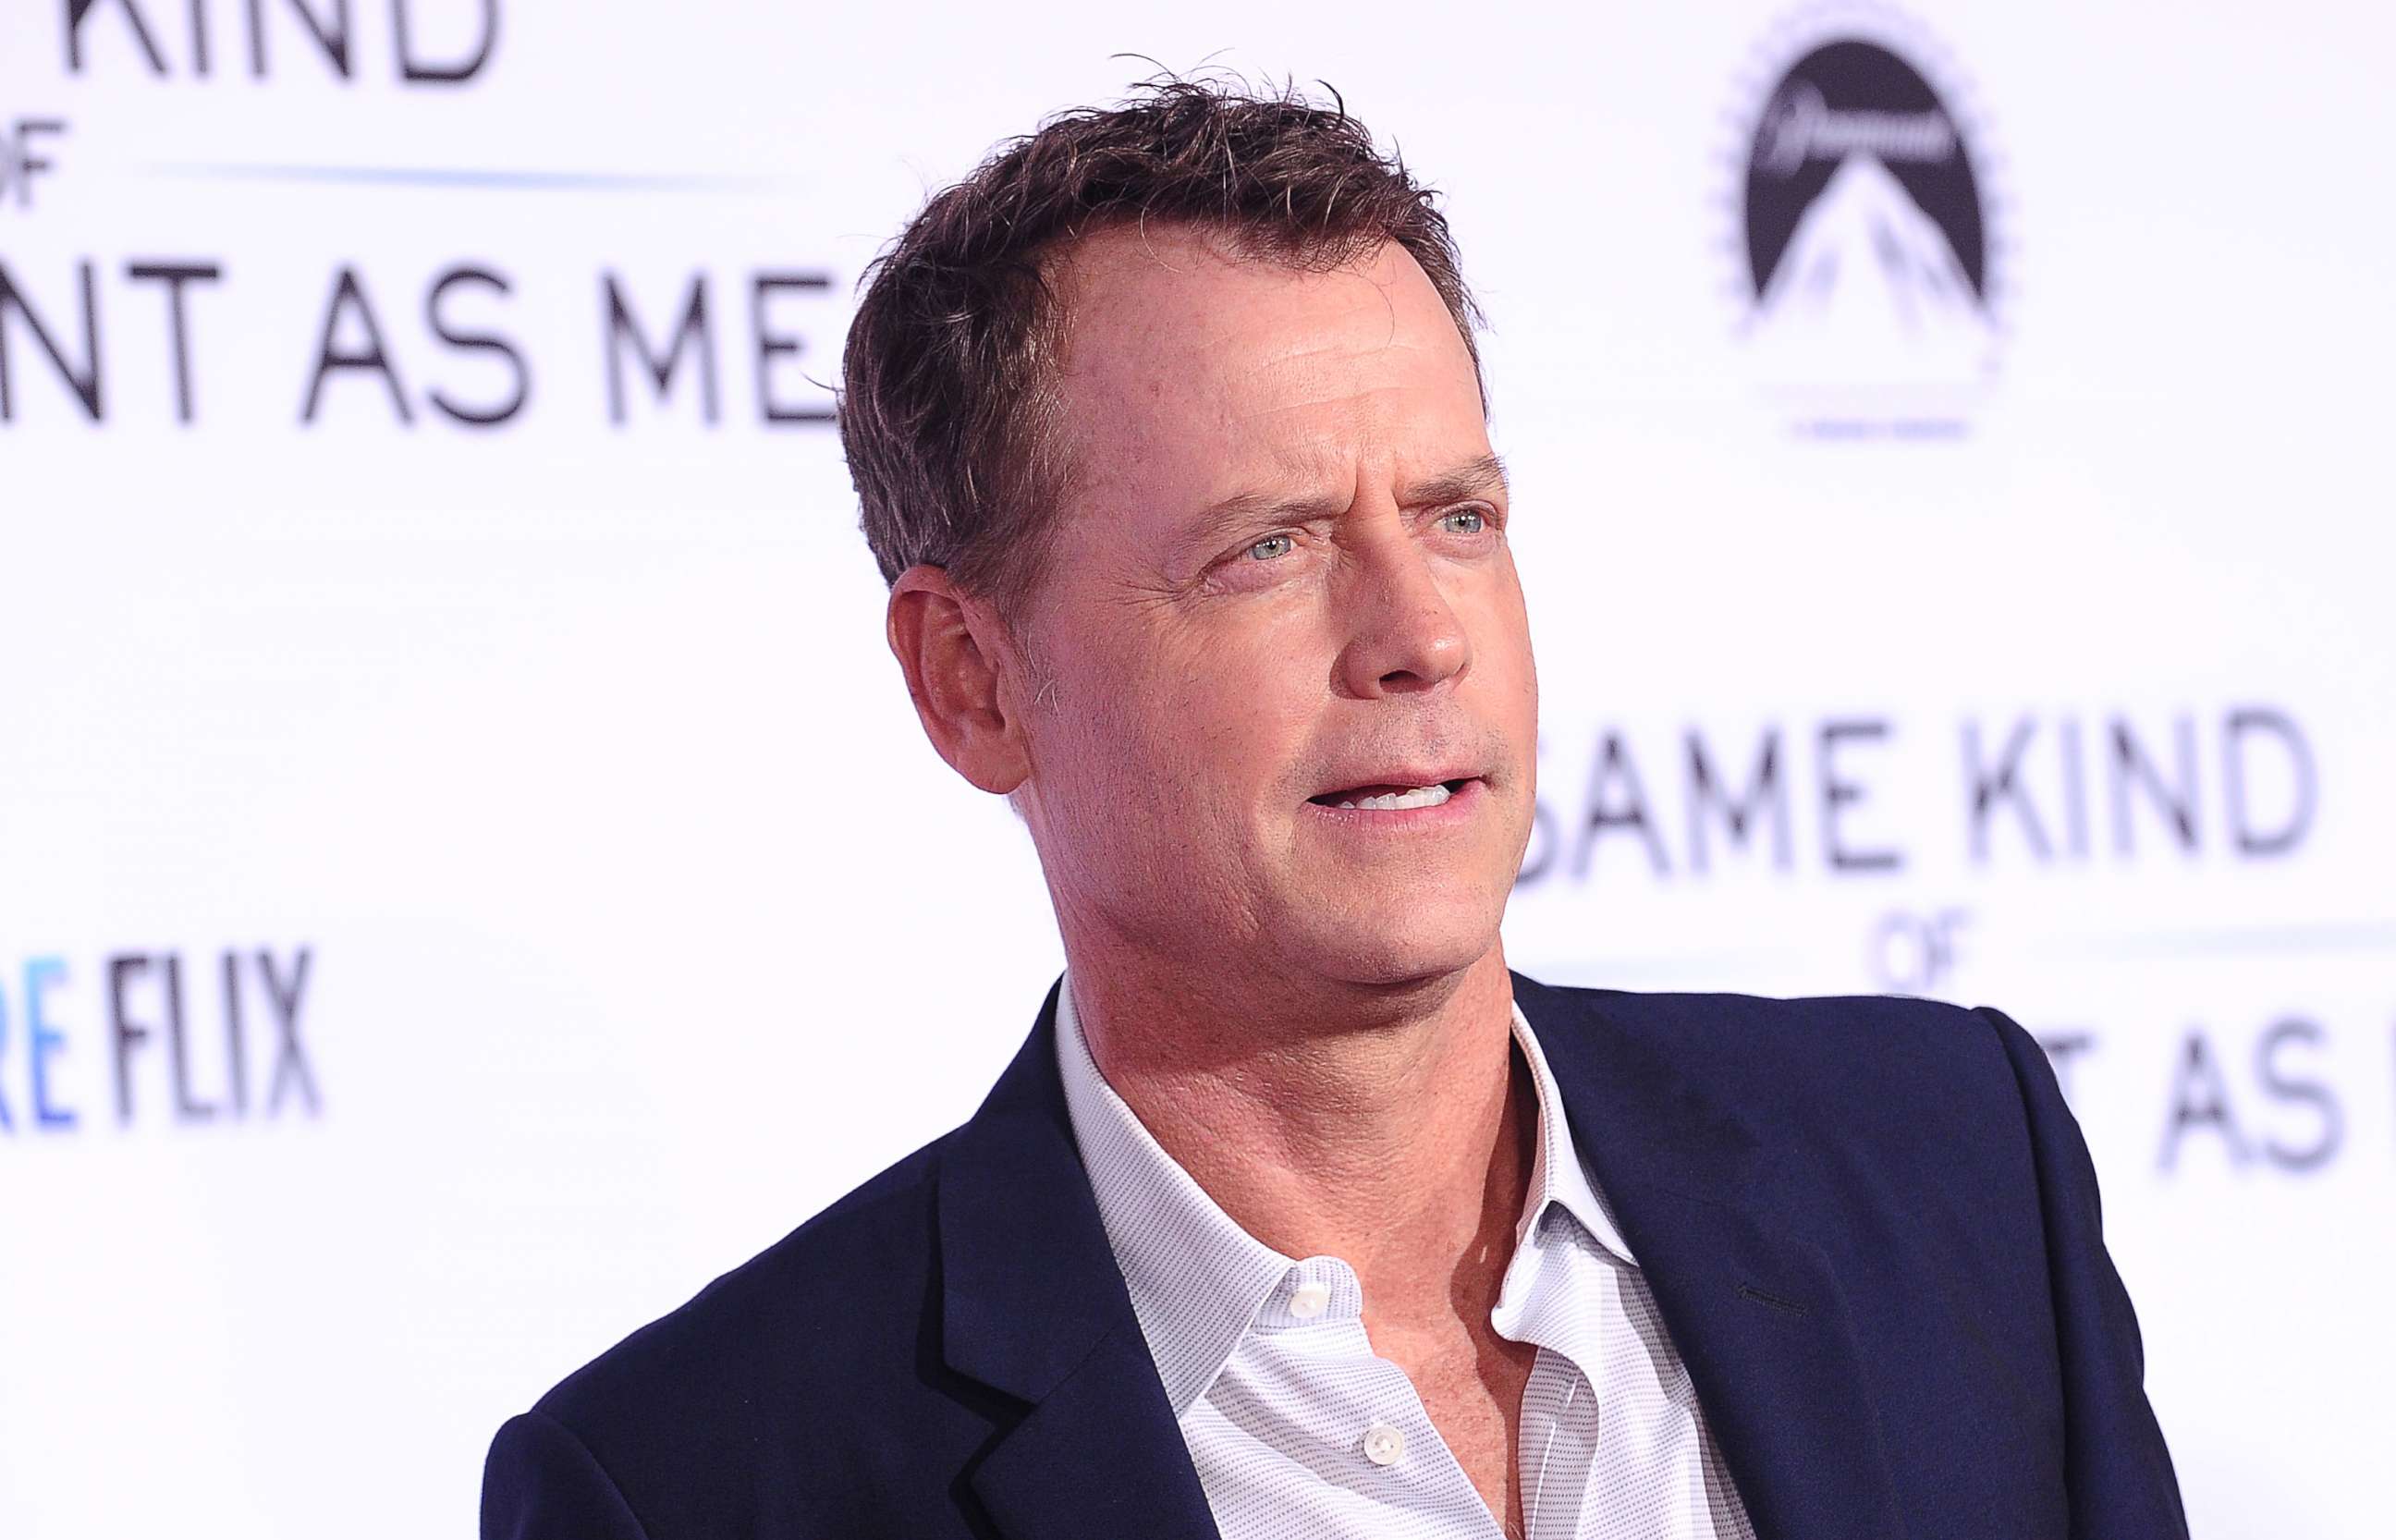 PHOTO: Actor Greg Kinnear attends the premiere of "Same Kind of Different as Me" at Westwood Village Theatre, Oct. 12, 2017, in Westwood, Calif.